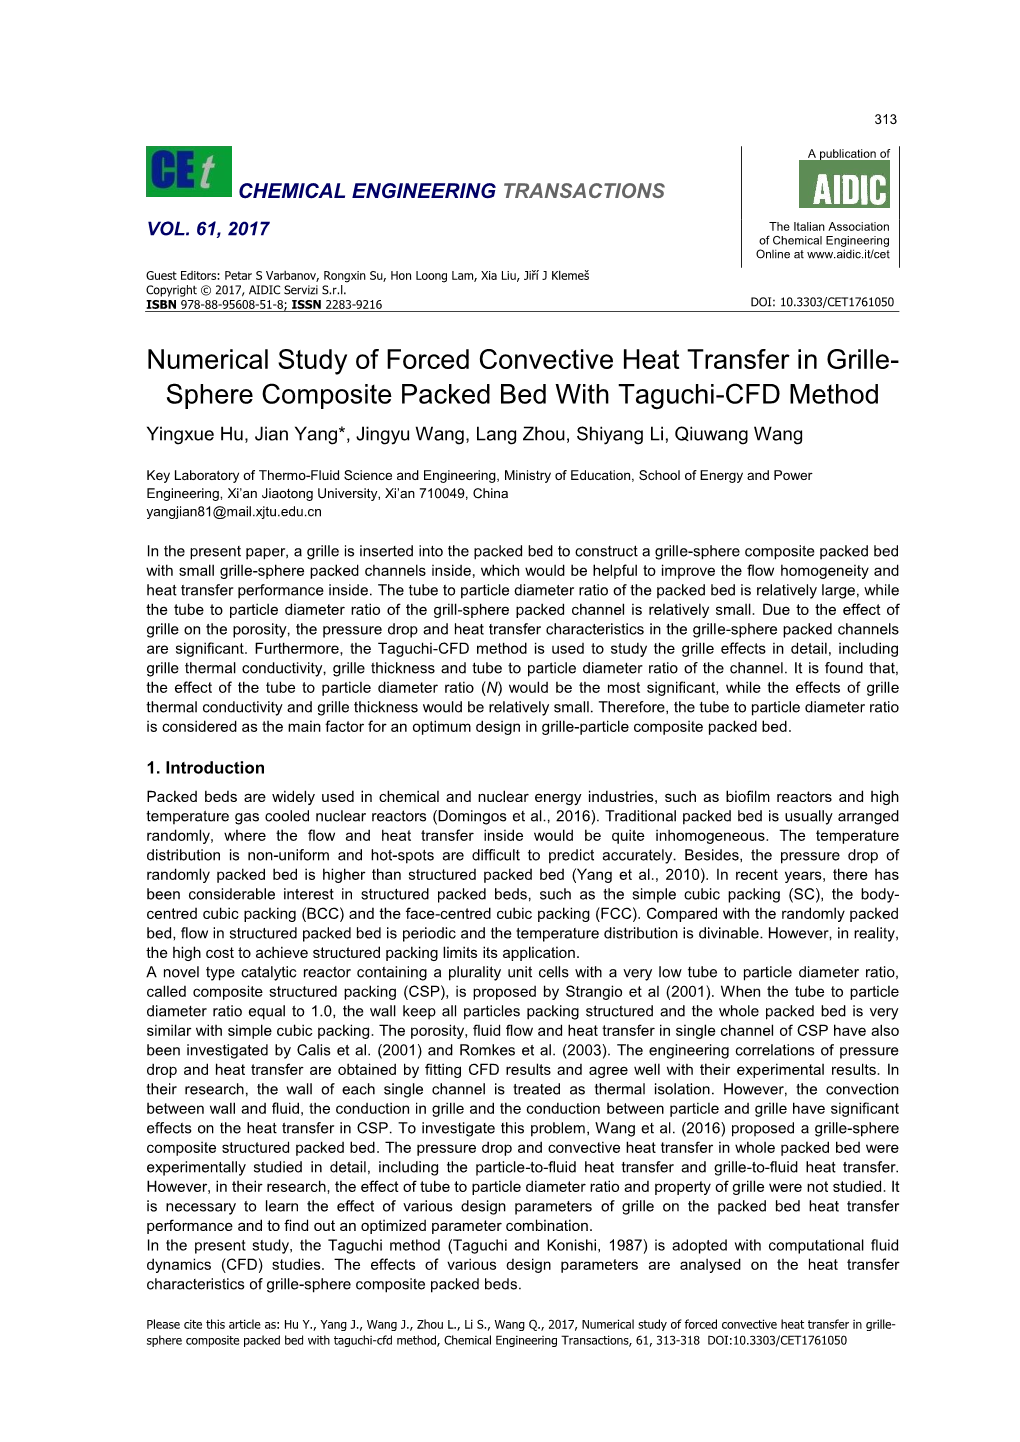 Numerical Study of Forced Convective Heat Transfer in Grille